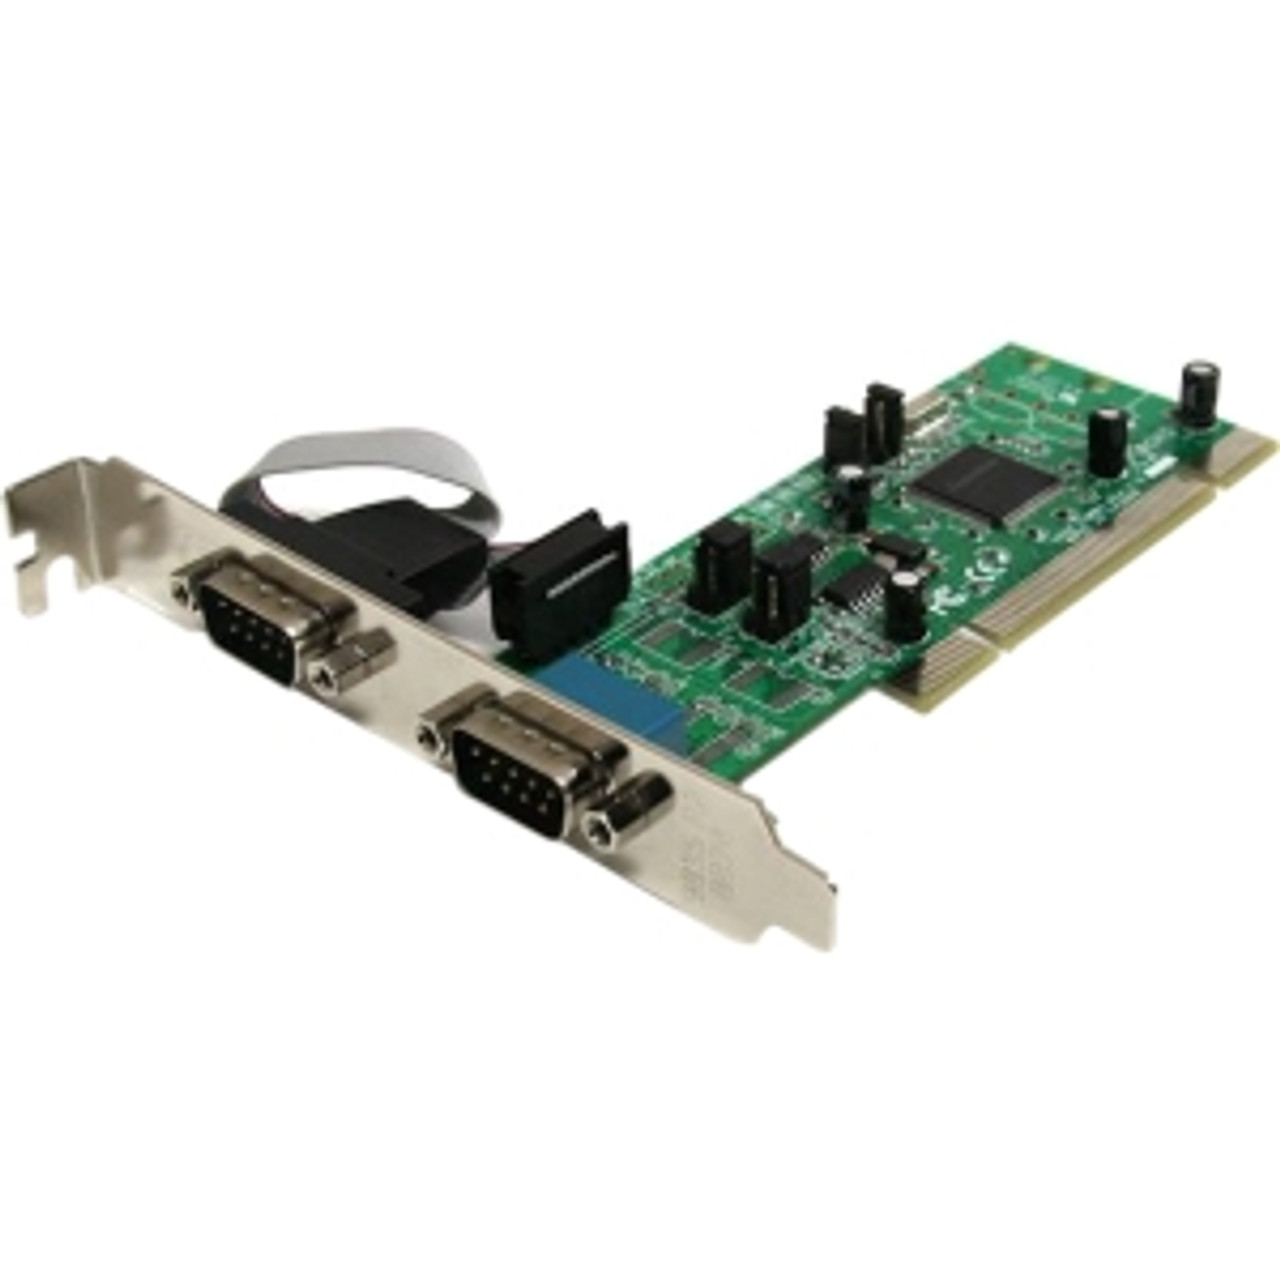 PCI2S4851050 StarTech 2-Port DB-9 RS-422/RS-485 PCI Serial Adapter Card with 161050 UART